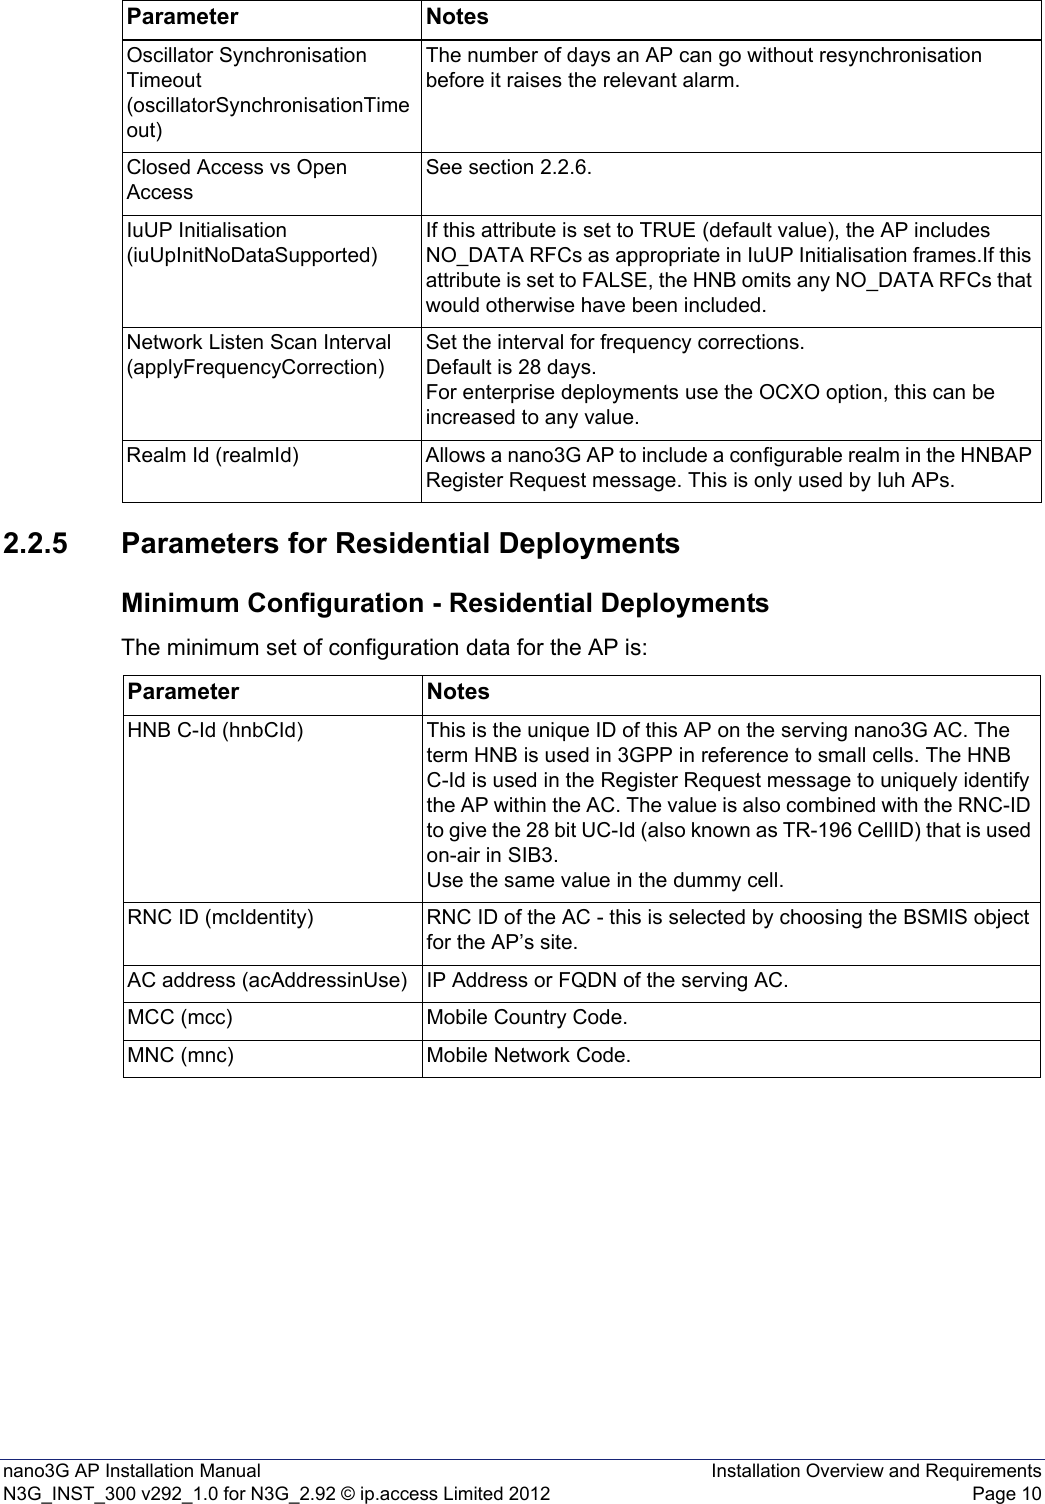 nano3G AP Installation Manual Installation Overview and RequirementsN3G_INST_300 v292_1.0 for N3G_2.92 © ip.access Limited 2012 Page 102.2.5 Parameters for Residential DeploymentsMinimum Configuration - Residential DeploymentsThe minimum set of configuration data for the AP is:Oscillator Synchronisation Timeout (oscillatorSynchronisationTimeout)The number of days an AP can go without resynchronisation before it raises the relevant alarm. Closed Access vs Open AccessSee section 2.2.6.IuUP Initialisation (iuUpInitNoDataSupported)If this attribute is set to TRUE (default value), the AP includes NO_DATA RFCs as appropriate in IuUP Initialisation frames.If this attribute is set to FALSE, the HNB omits any NO_DATA RFCs that would otherwise have been included.Network Listen Scan Interval (applyFrequencyCorrection)Set the interval for frequency corrections. Default is 28 days. For enterprise deployments use the OCXO option, this can be increased to any value.Realm Id (realmId) Allows a nano3G AP to include a configurable realm in the HNBAP Register Request message. This is only used by Iuh APs.Parameter NotesParameter NotesHNB C-Id (hnbCId) This is the unique ID of this AP on the serving nano3G AC. The term HNB is used in 3GPP in reference to small cells. The HNB C-Id is used in the Register Request message to uniquely identify the AP within the AC. The value is also combined with the RNC-ID to give the 28 bit UC-Id (also known as TR-196 CellID) that is used on-air in SIB3.Use the same value in the dummy cell.RNC ID (mcIdentity) RNC ID of the AC - this is selected by choosing the BSMIS object for the AP’s site.AC address (acAddressinUse) IP Address or FQDN of the serving AC.MCC (mcc) Mobile Country Code.MNC (mnc) Mobile Network Code.